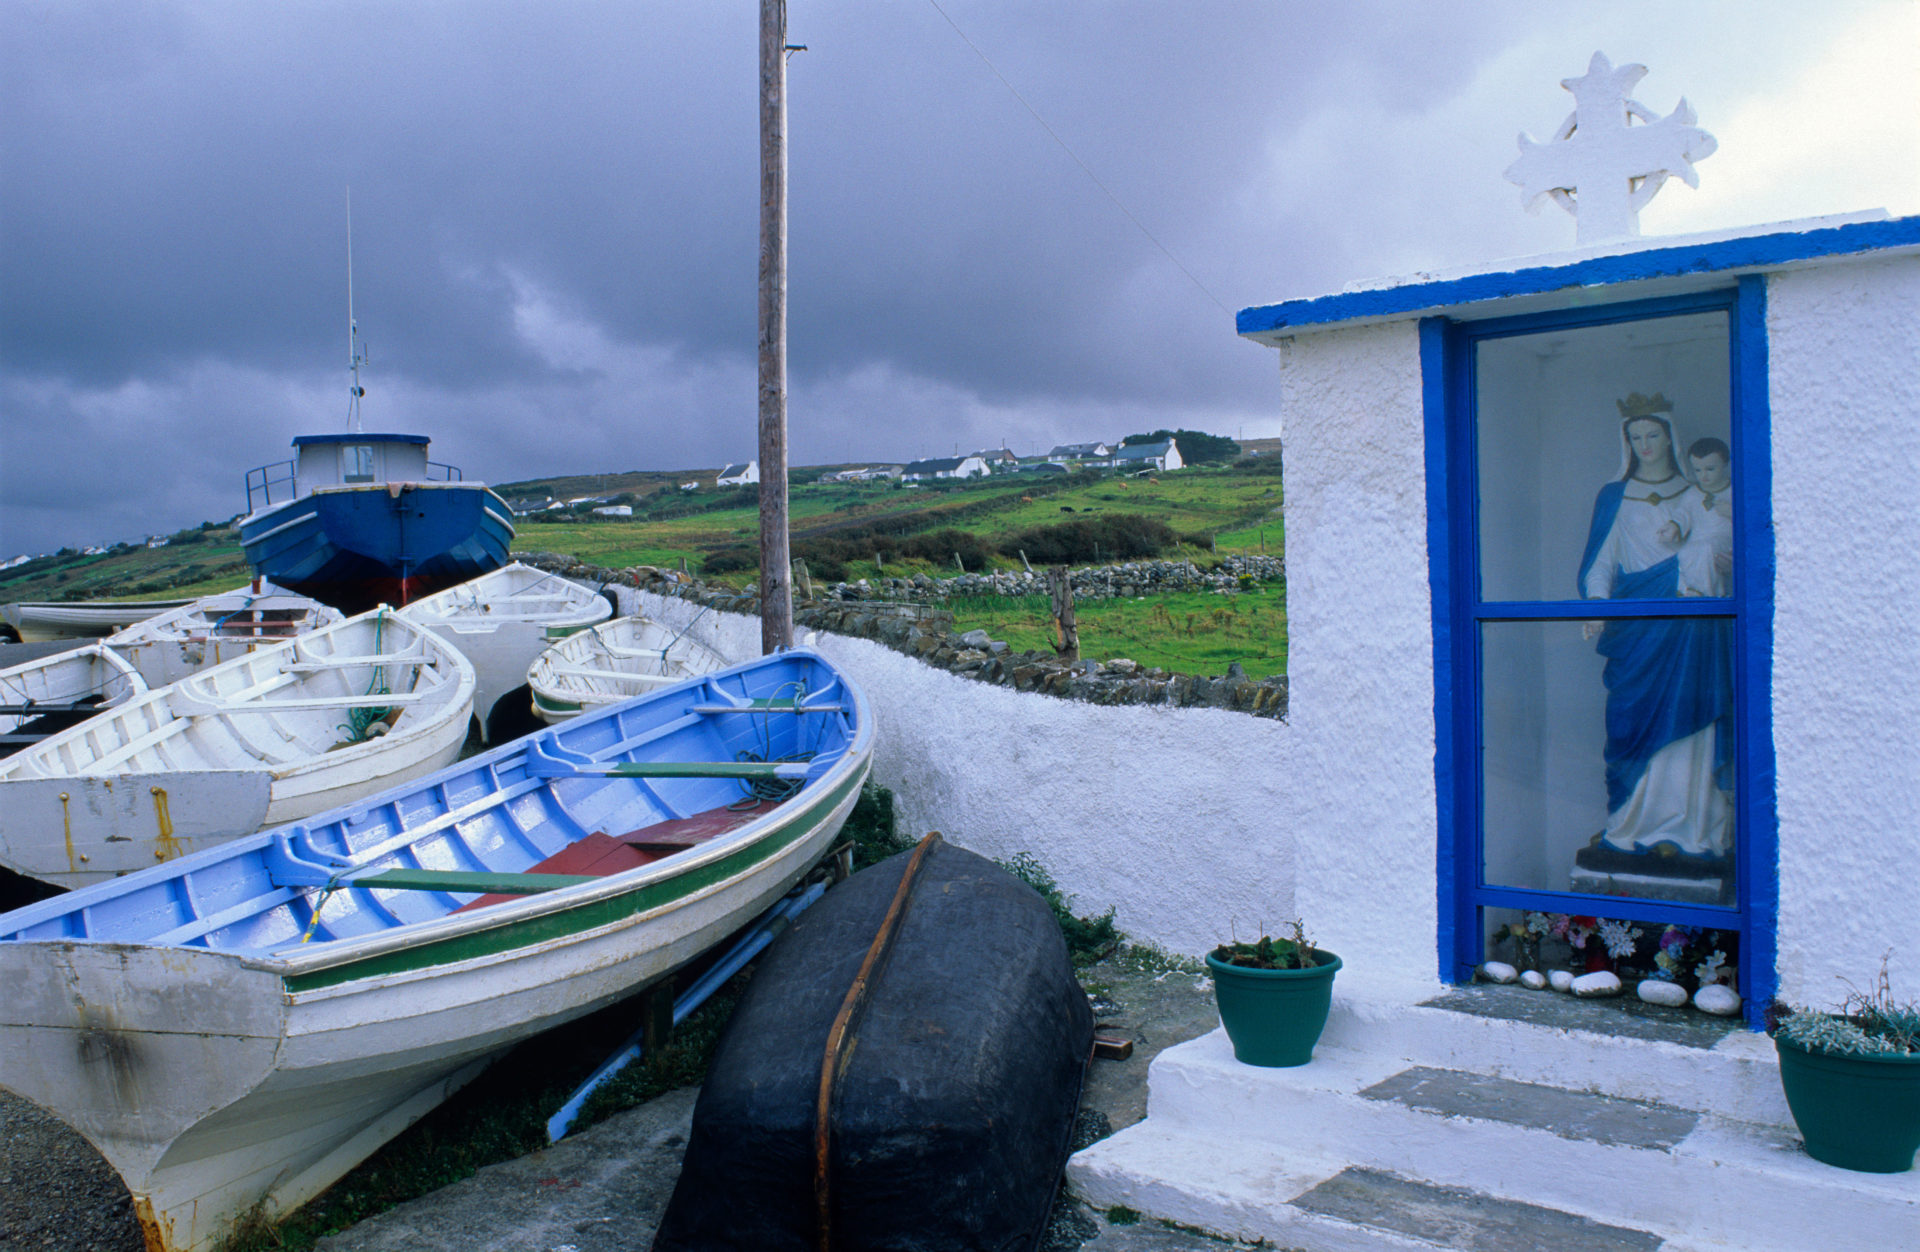 Magheraroarty Pier with chapel near Gortahork, County Donegal